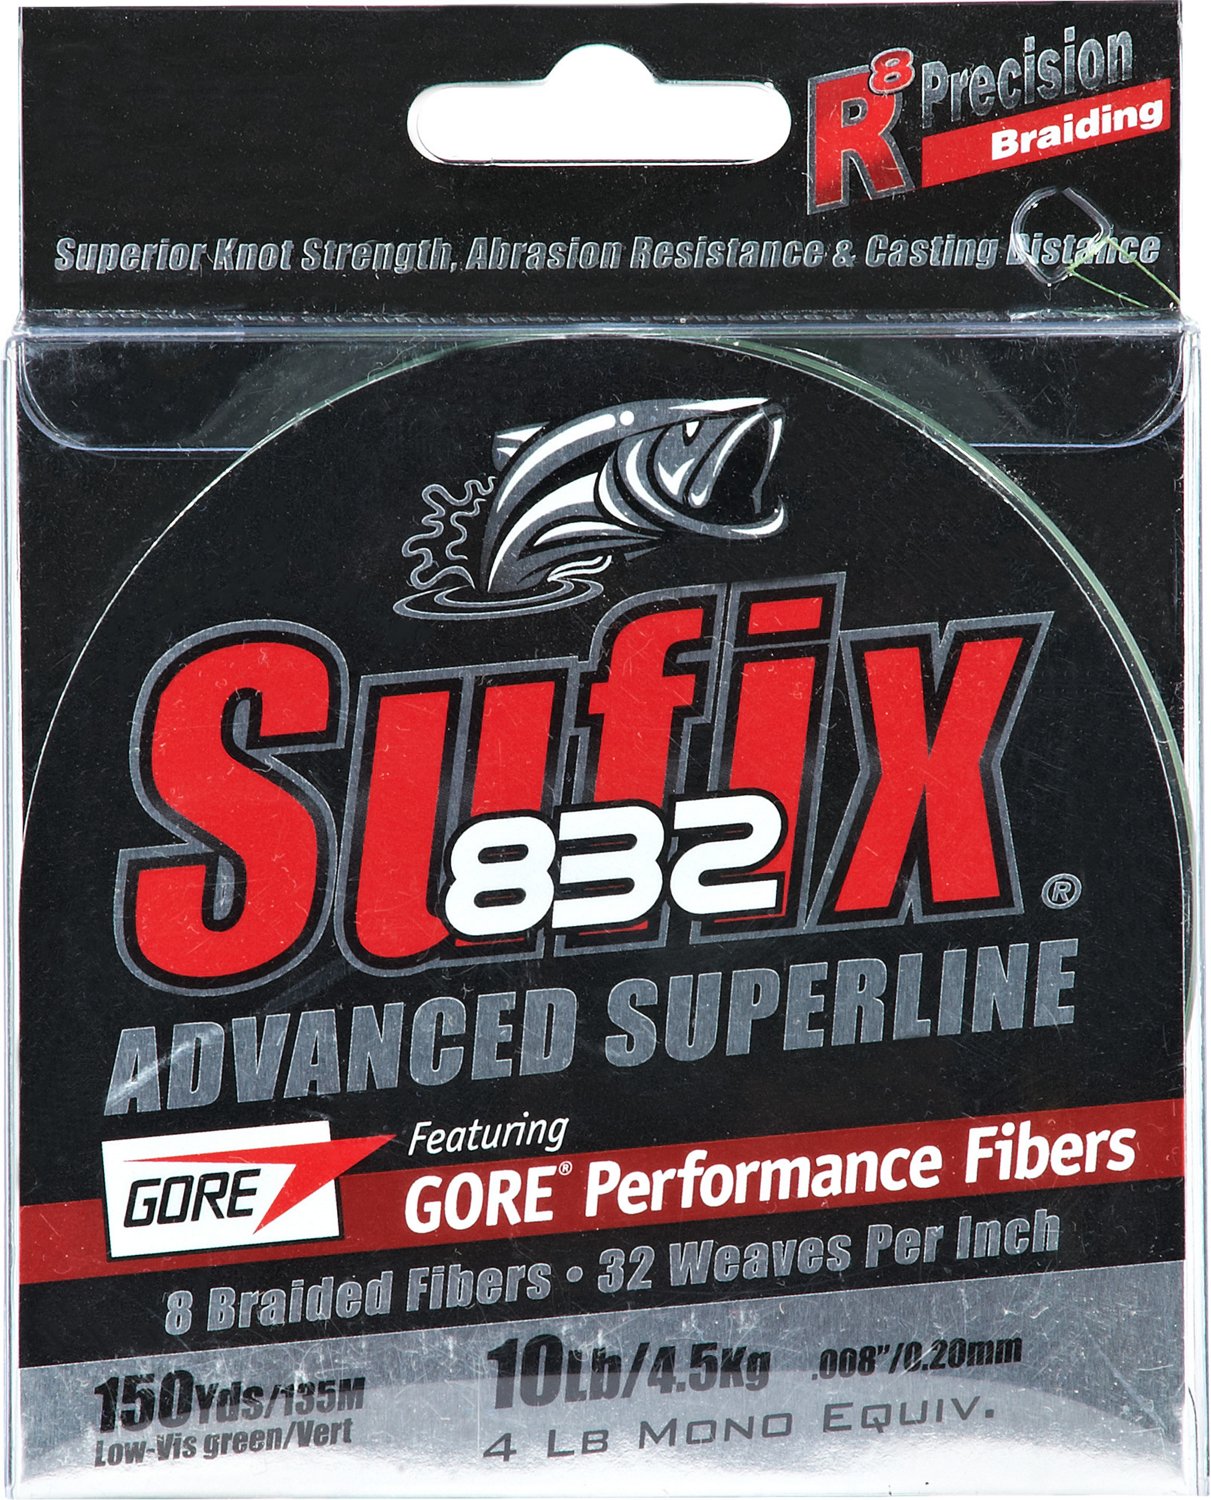 Academy Sports + Outdoors Sufix 832 Advanced Superline 10 lb - 150 yards Braided  Fishing Line